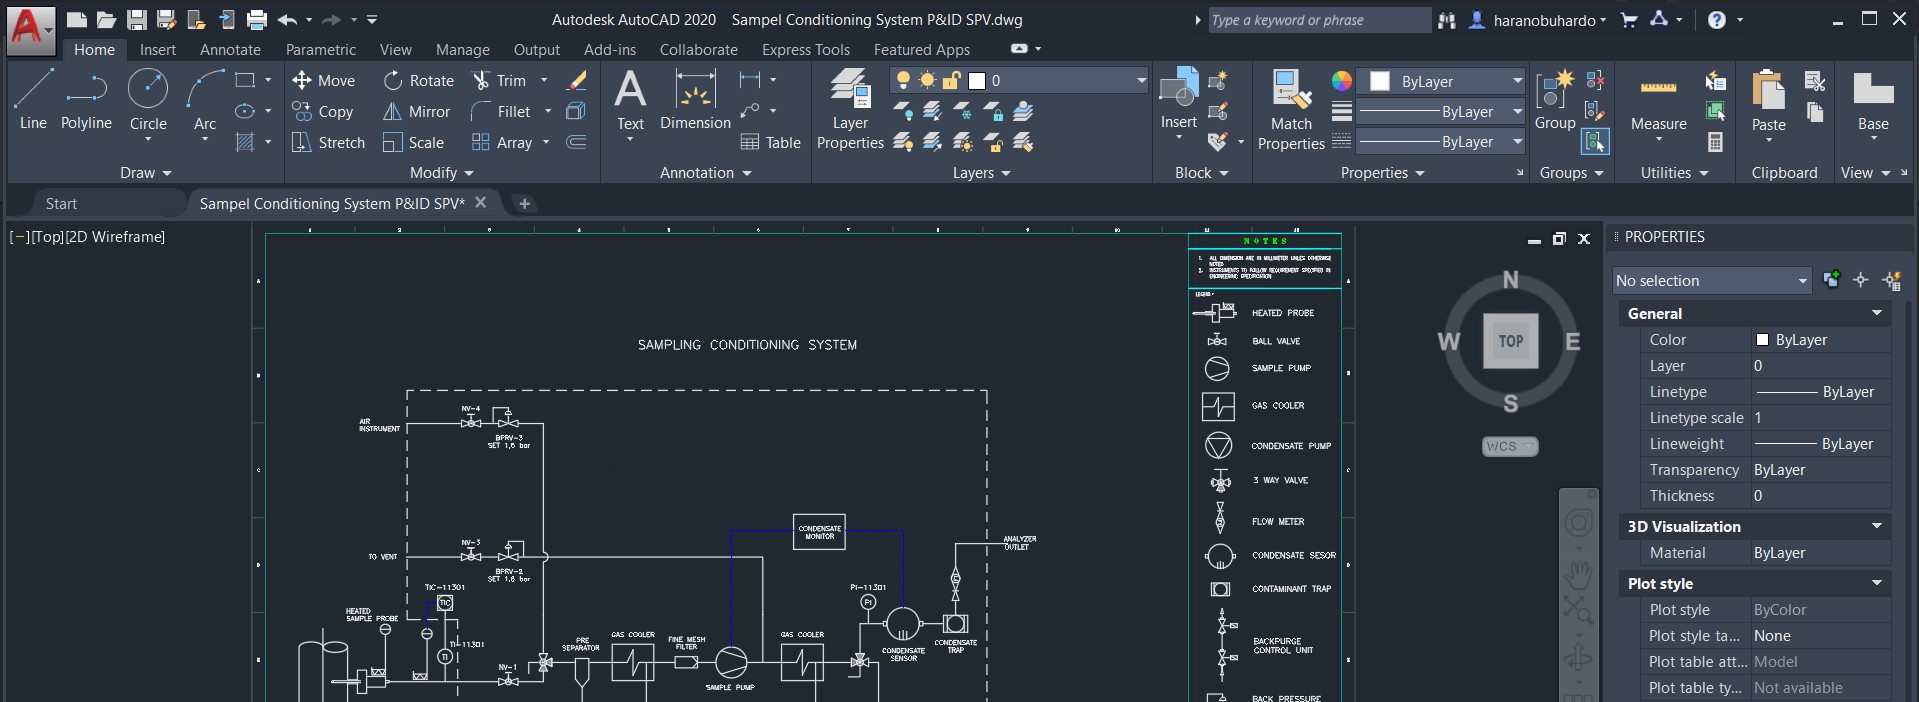 How to Use AutoCAD for FREE as Student